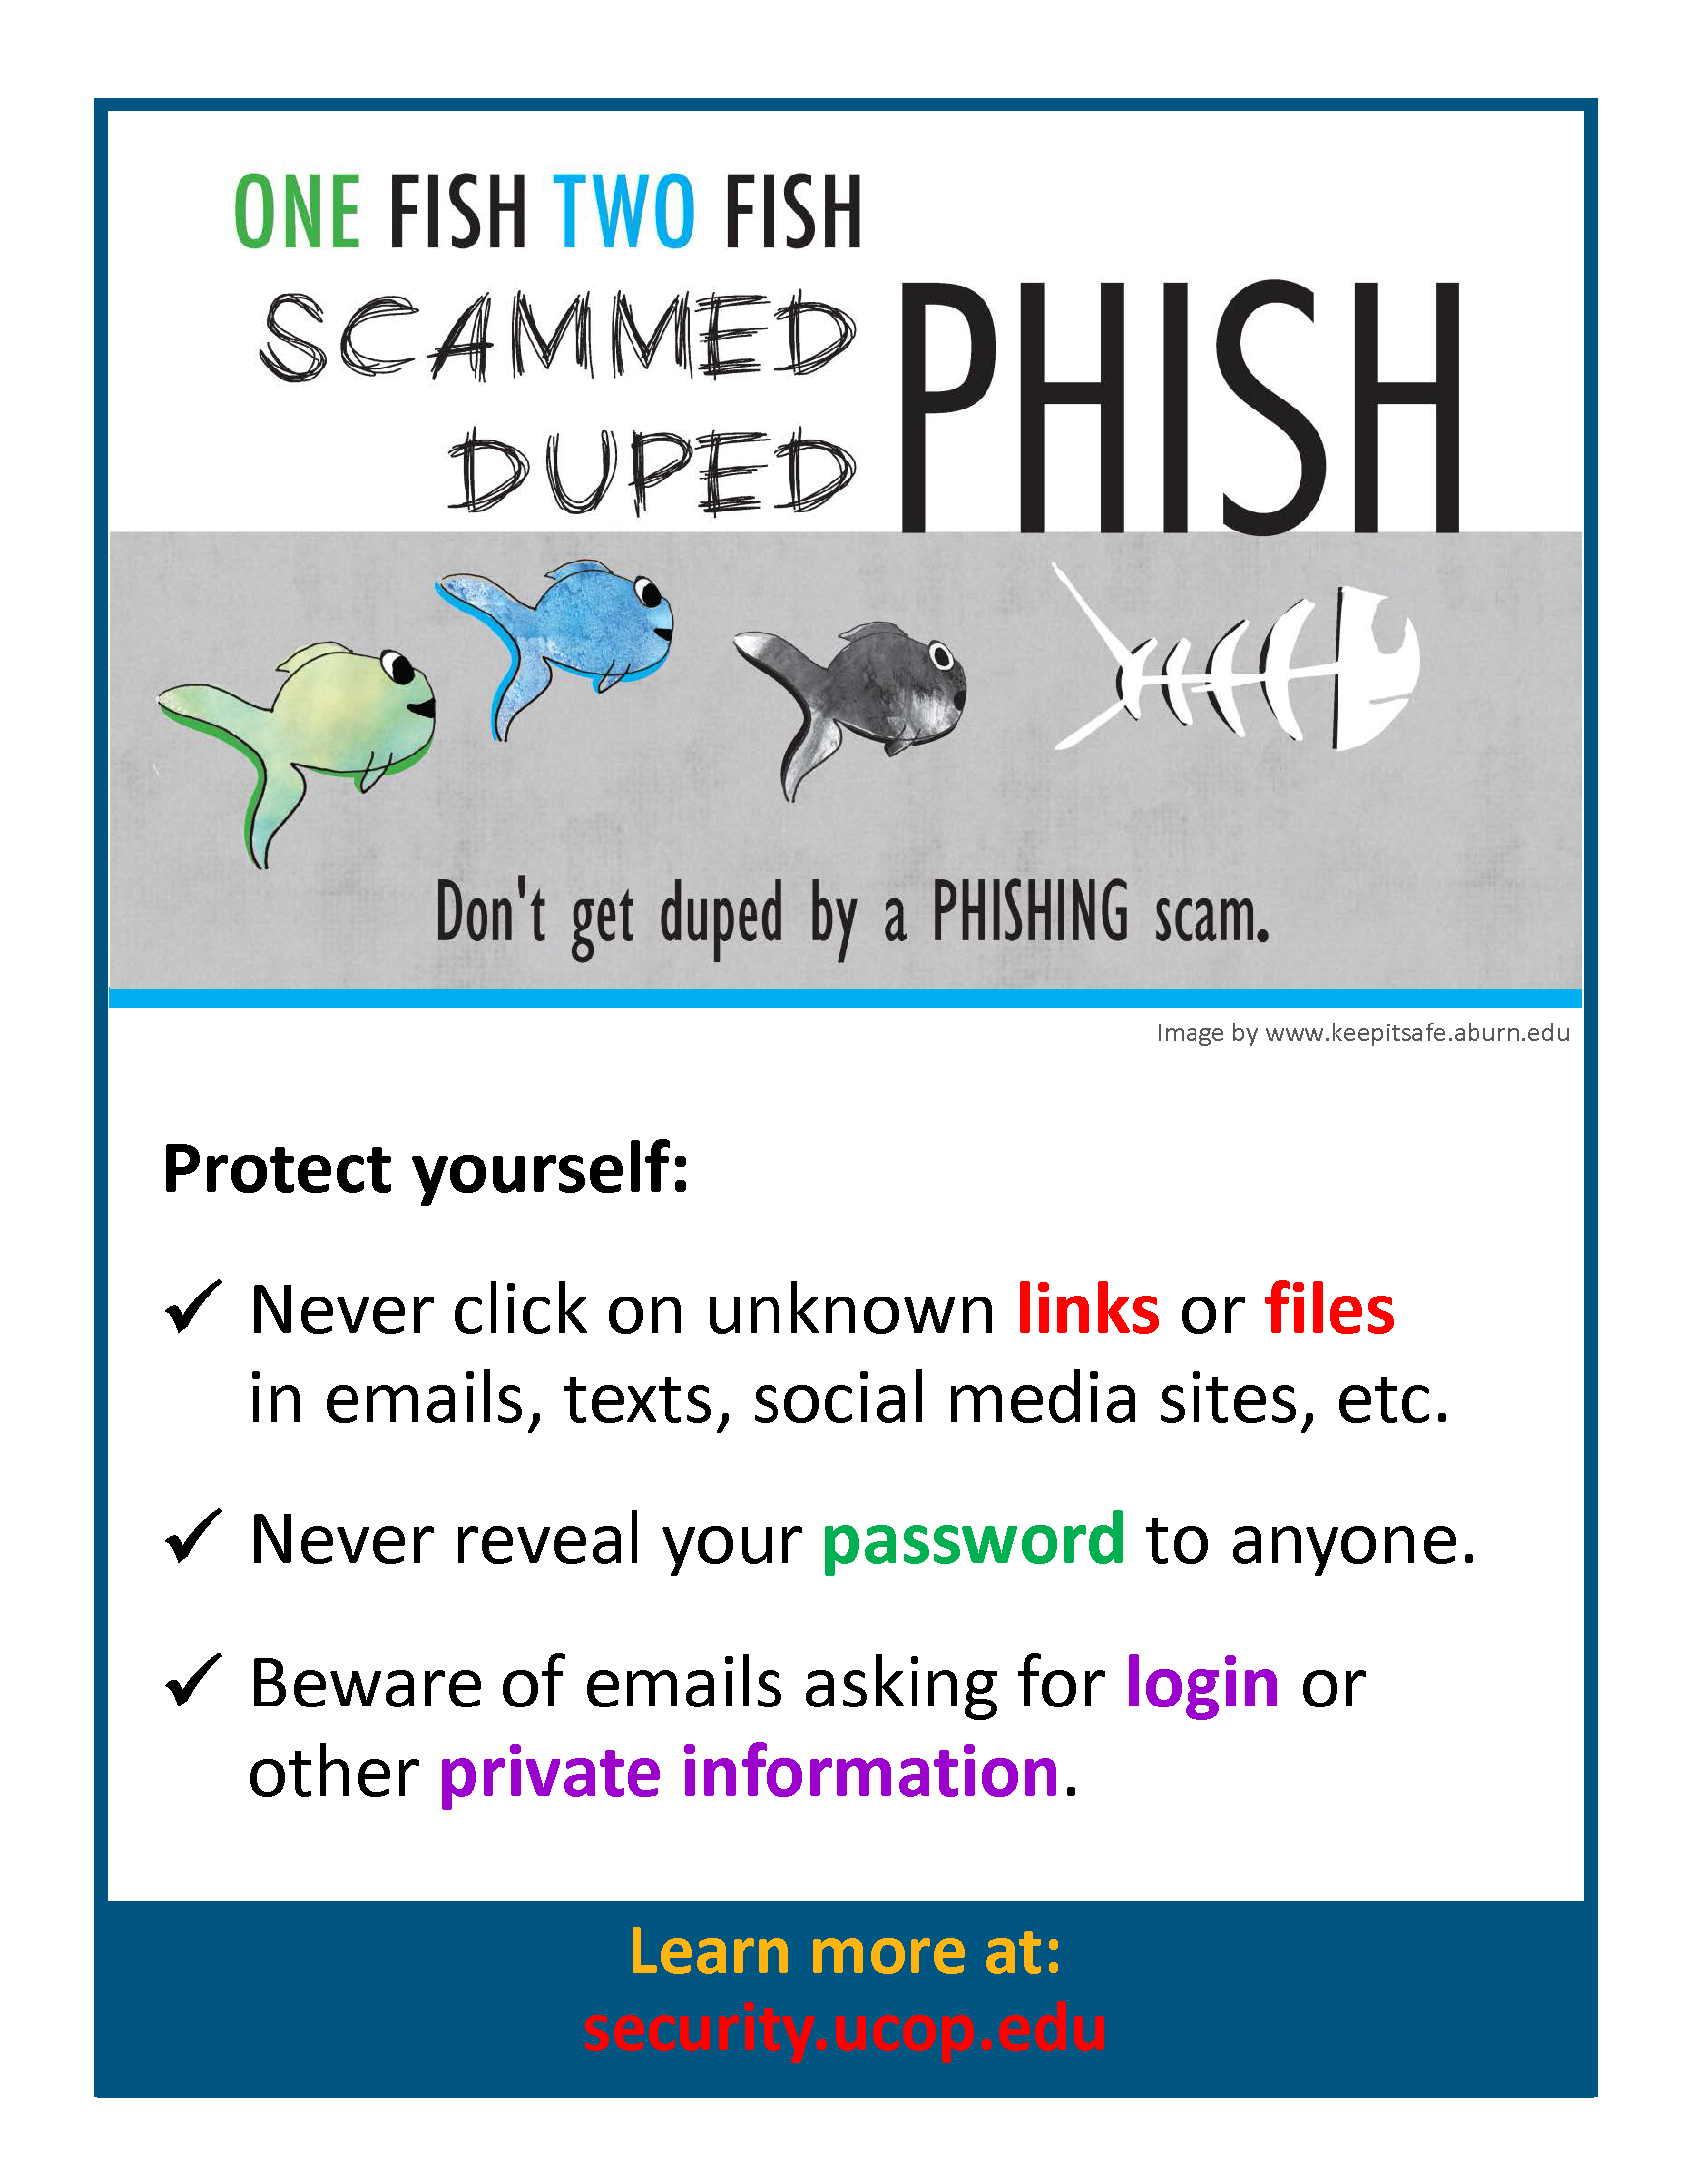 Flyer: One fish two fish, scammed fish duped fish. Don't get duped by a phishing scam.